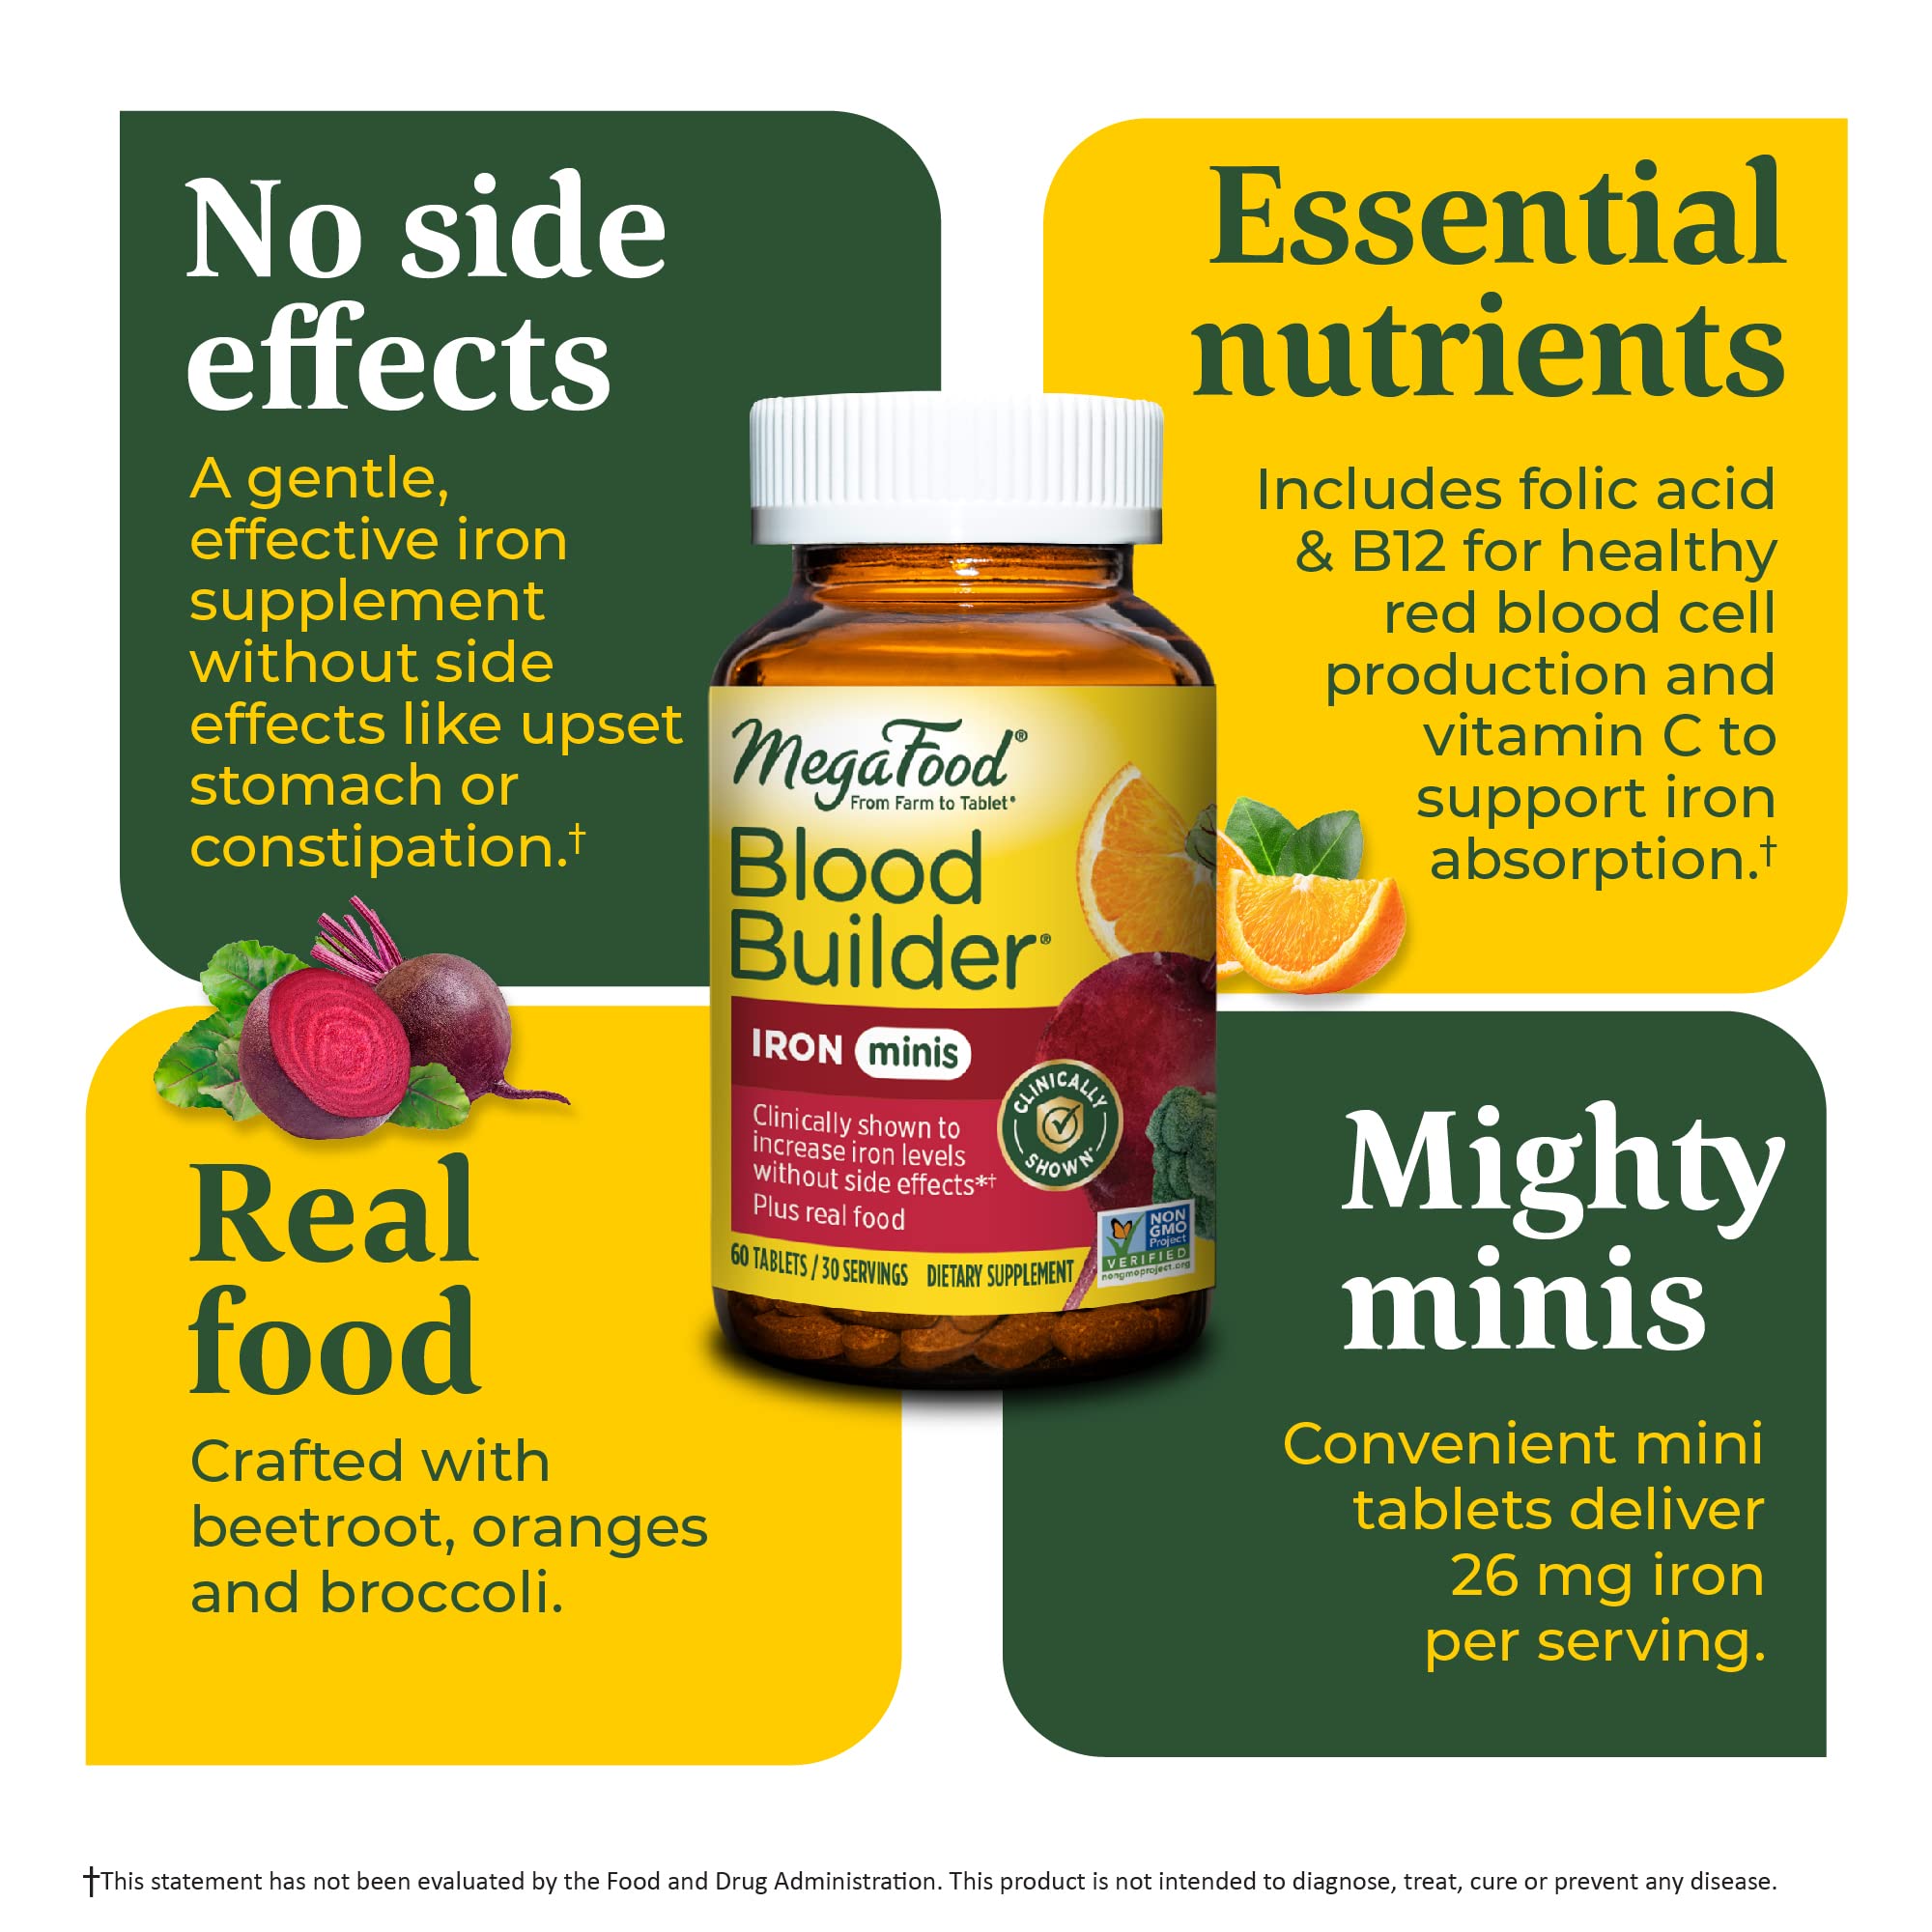 MegaFood Blood Builder Minis - Iron Supplement Clinically Shown to Increase Iron Levels Without Side Effects - Iron with Vitamin C, Vitamin B12 & Folic Acid - Vegan - 72 Tablets (36 Servings)